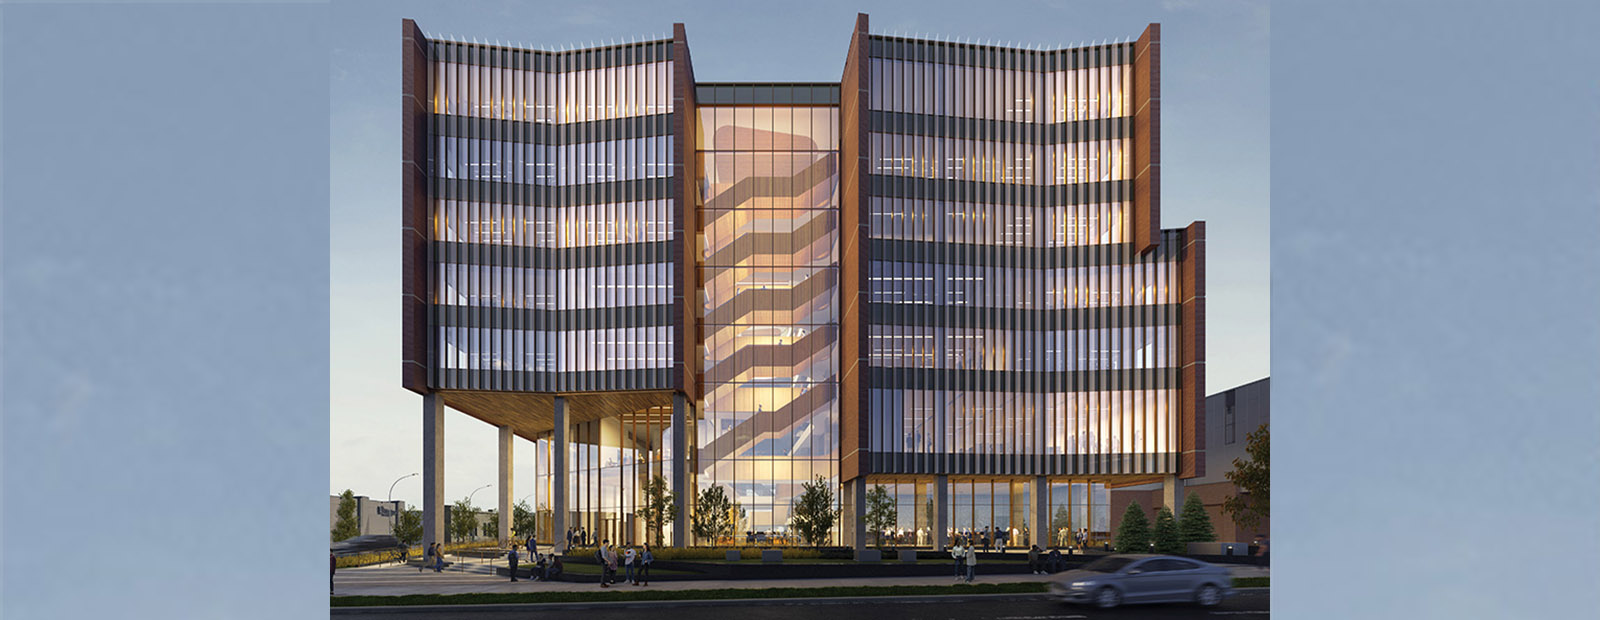 Rendering of the planned new business building